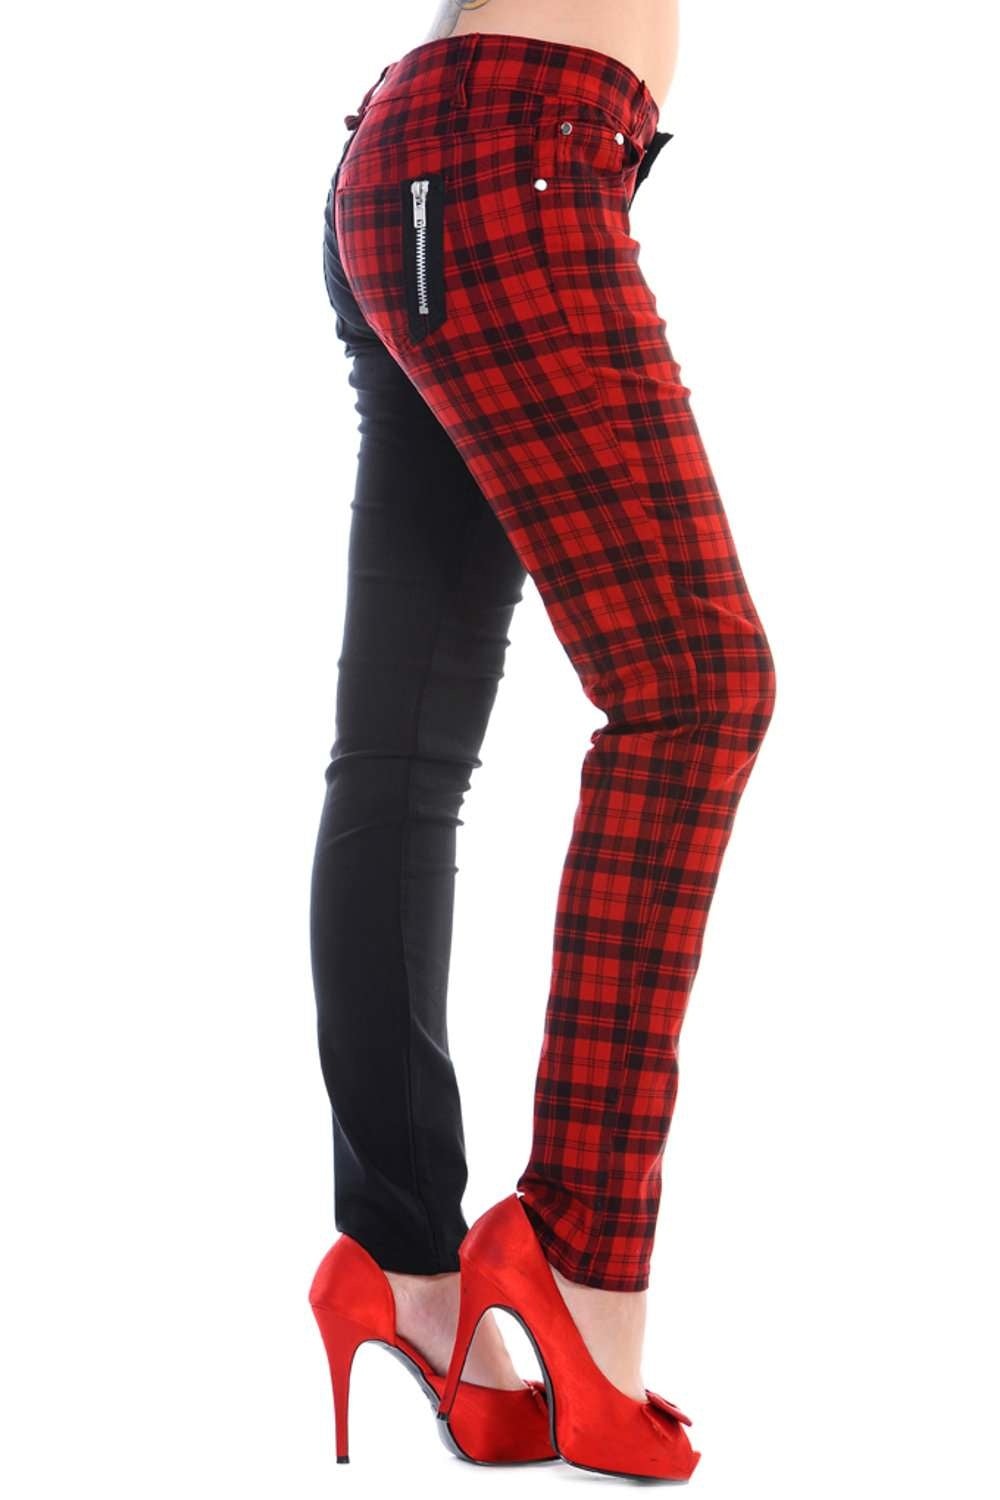 Red tartan check trousers with one leg black, low rise. 